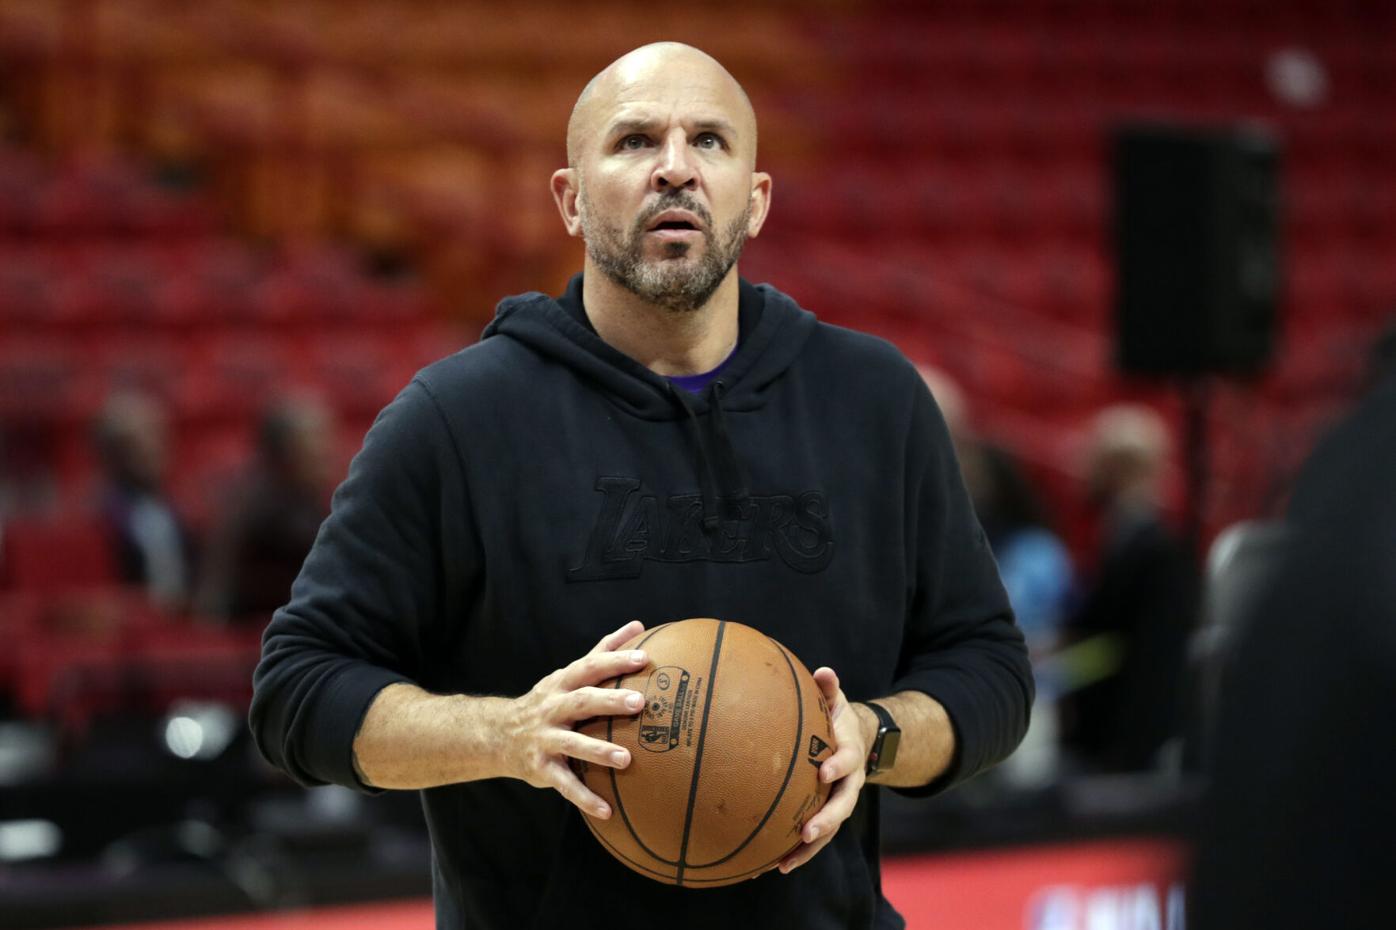 Dirk Nowitzki, Jason Kidd could have shared Cal as an alma mater